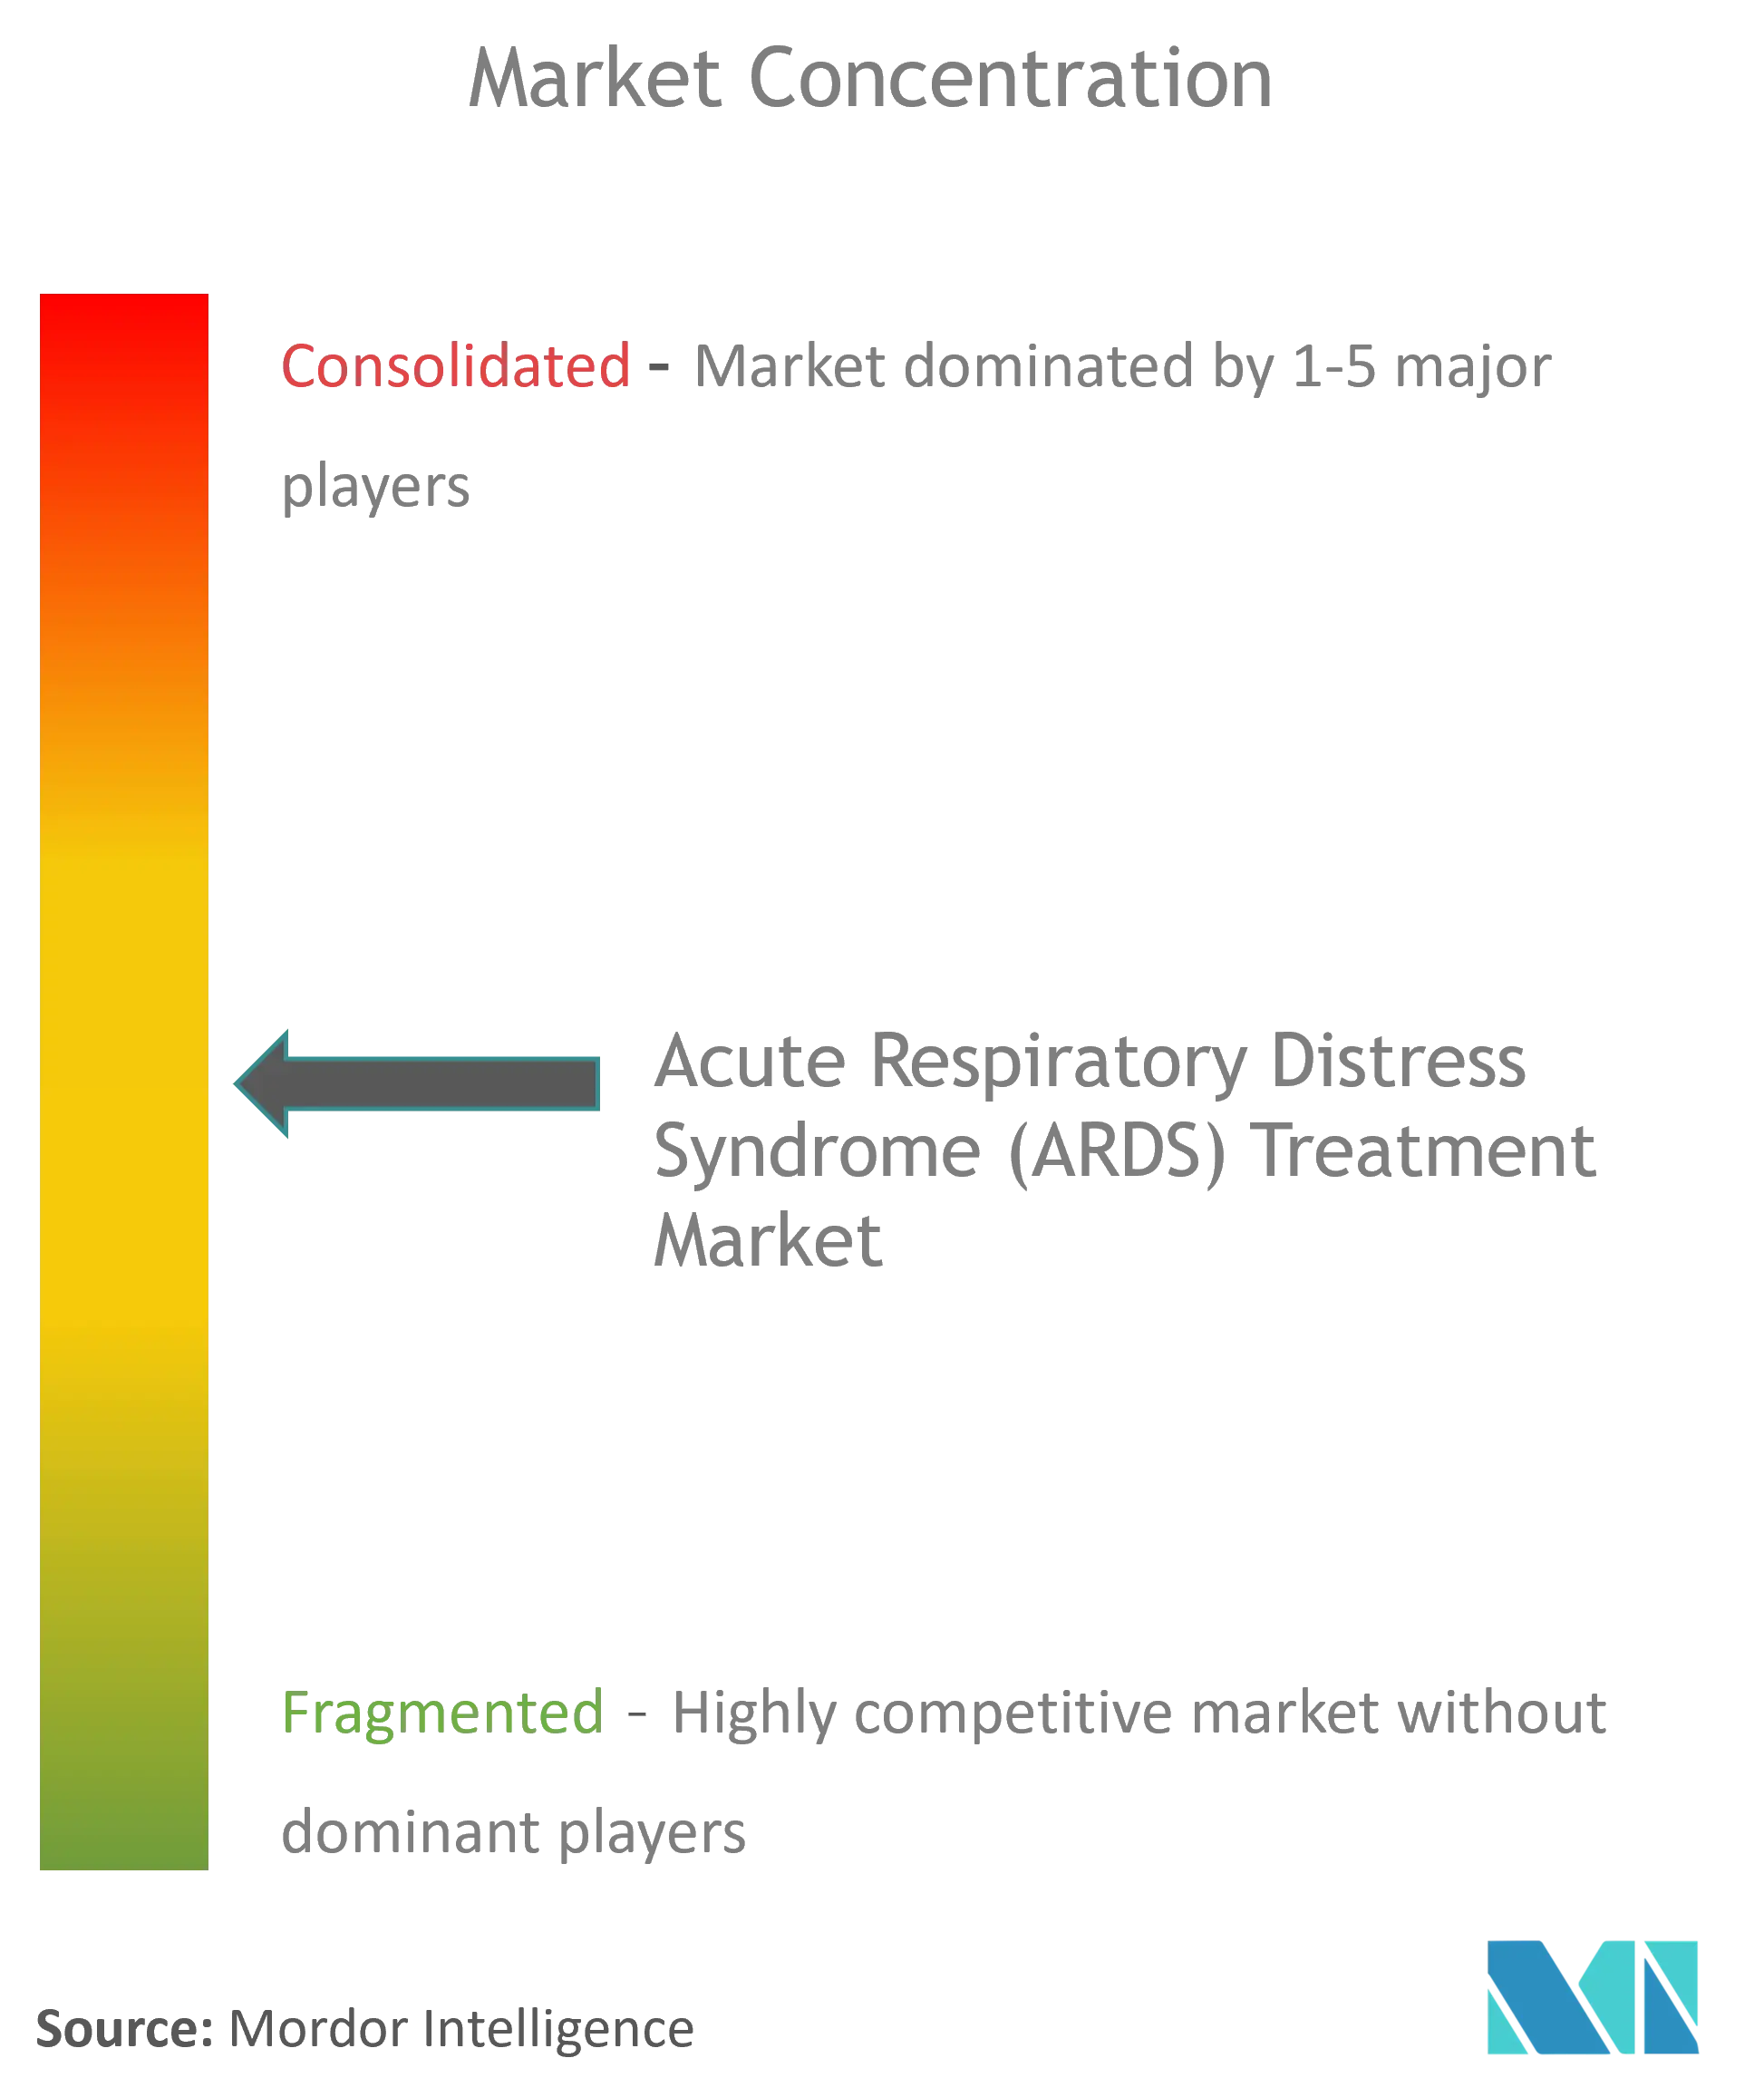 Global Acute Respiratory Distress Syndrome (ARDS) Treatment Market Concentration